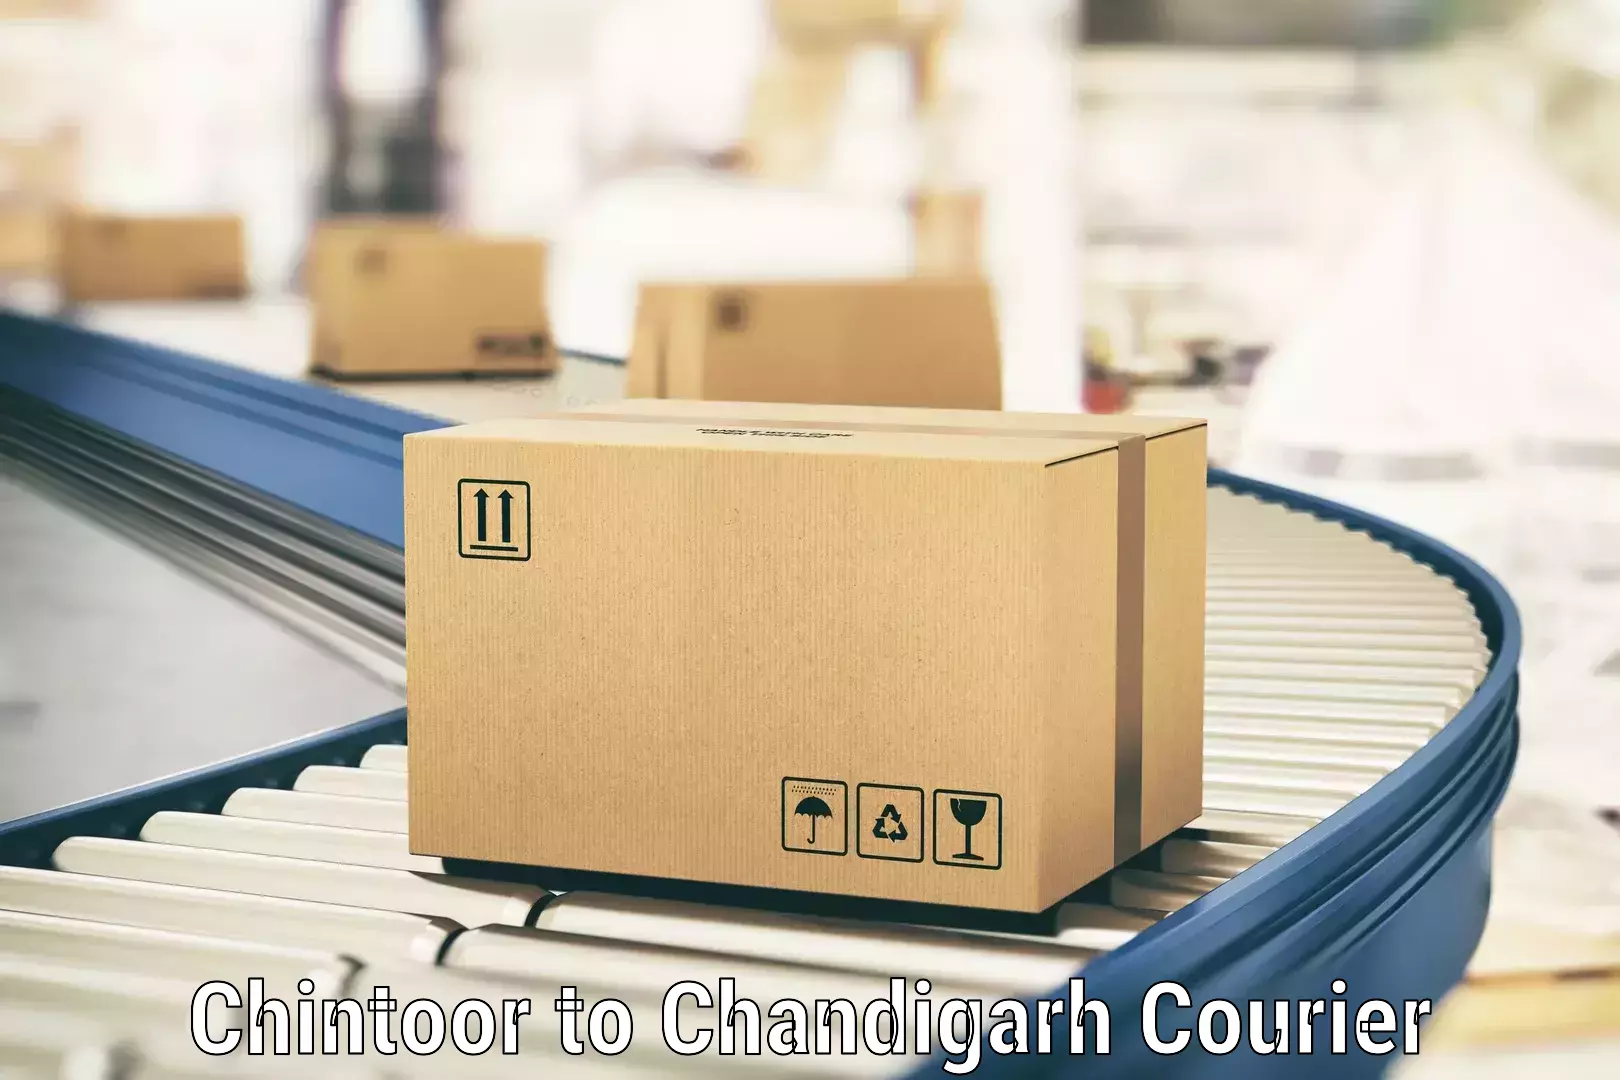 Global courier networks Chintoor to Chandigarh